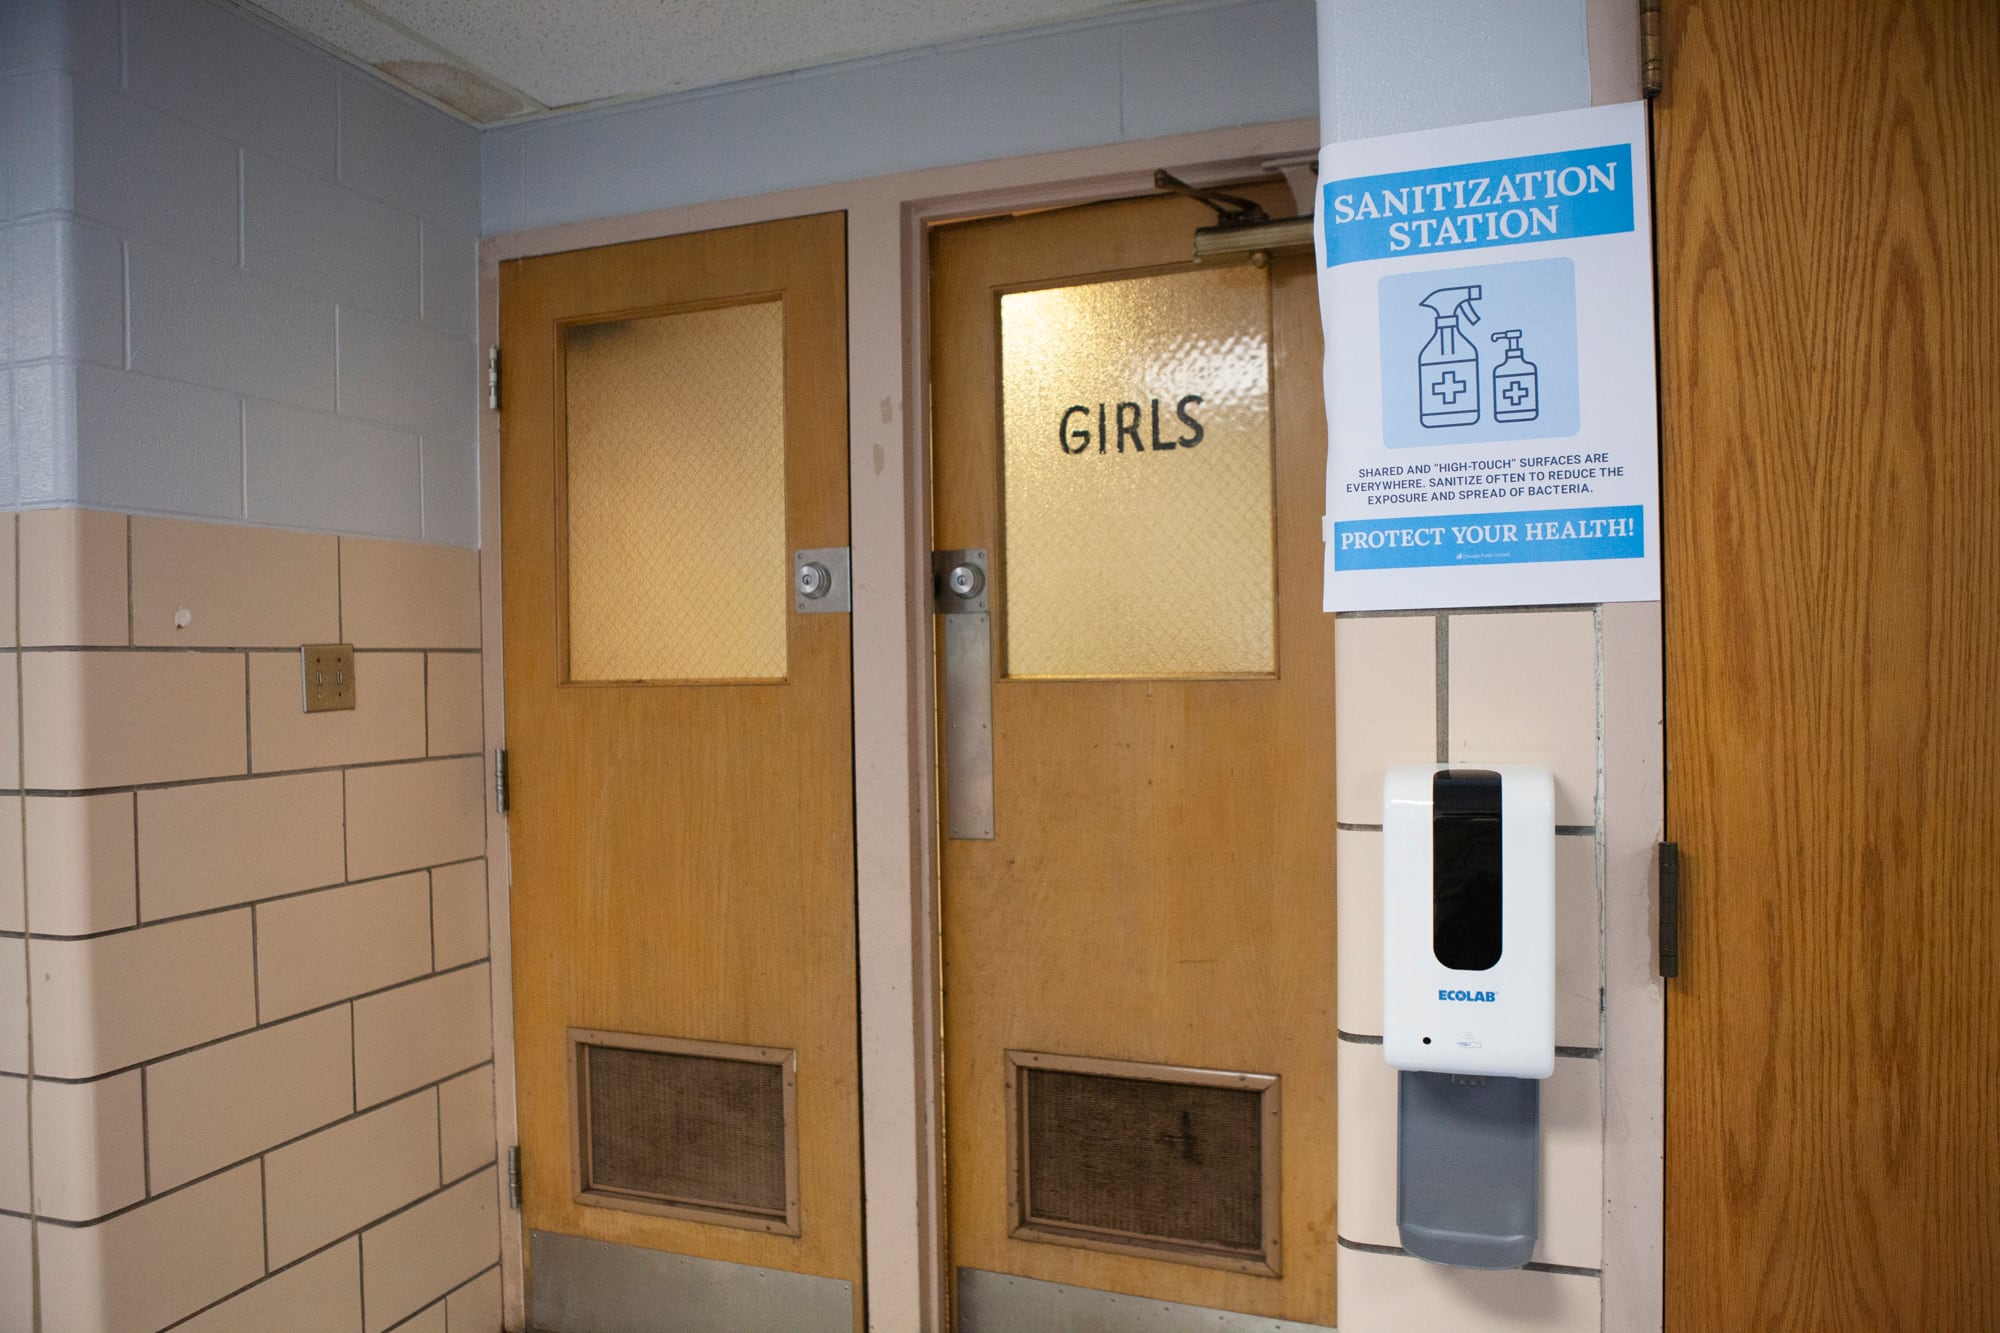 A sign outside a girls bathroom indicating a sanitization station.